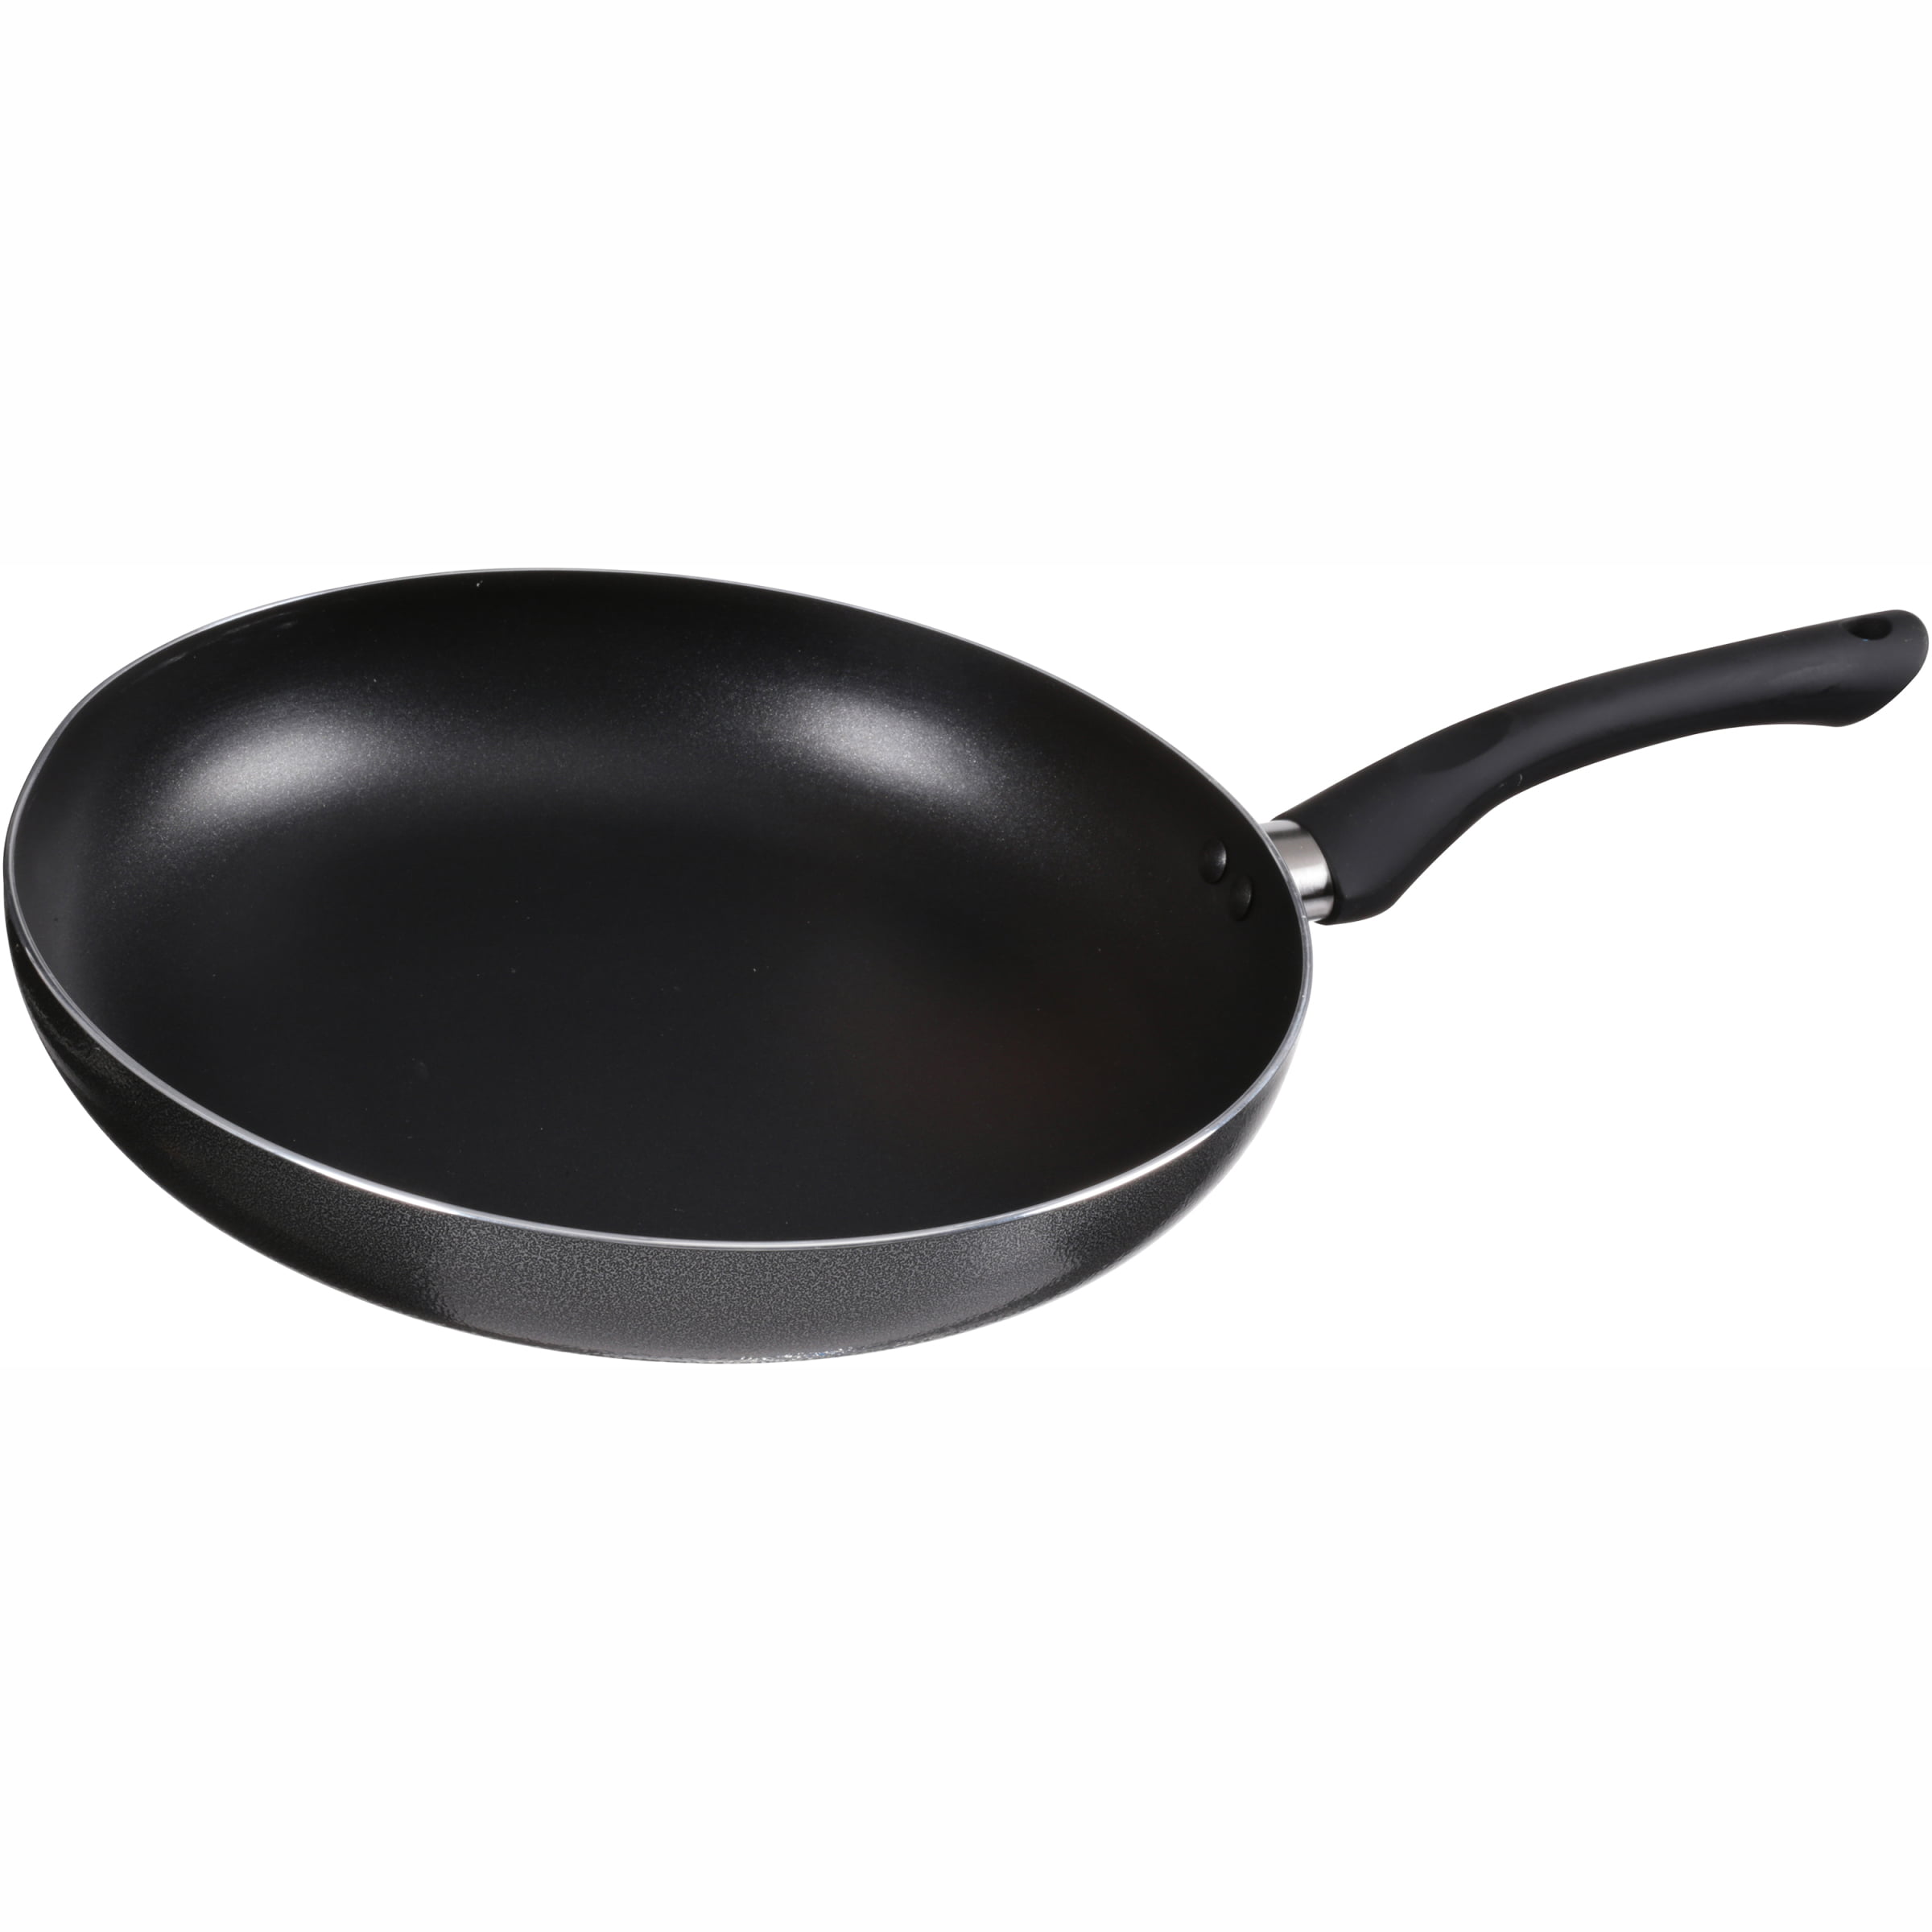 The Kitchen Sense Heavy Duty Non-Stick Fry Pan with Glass Lid 